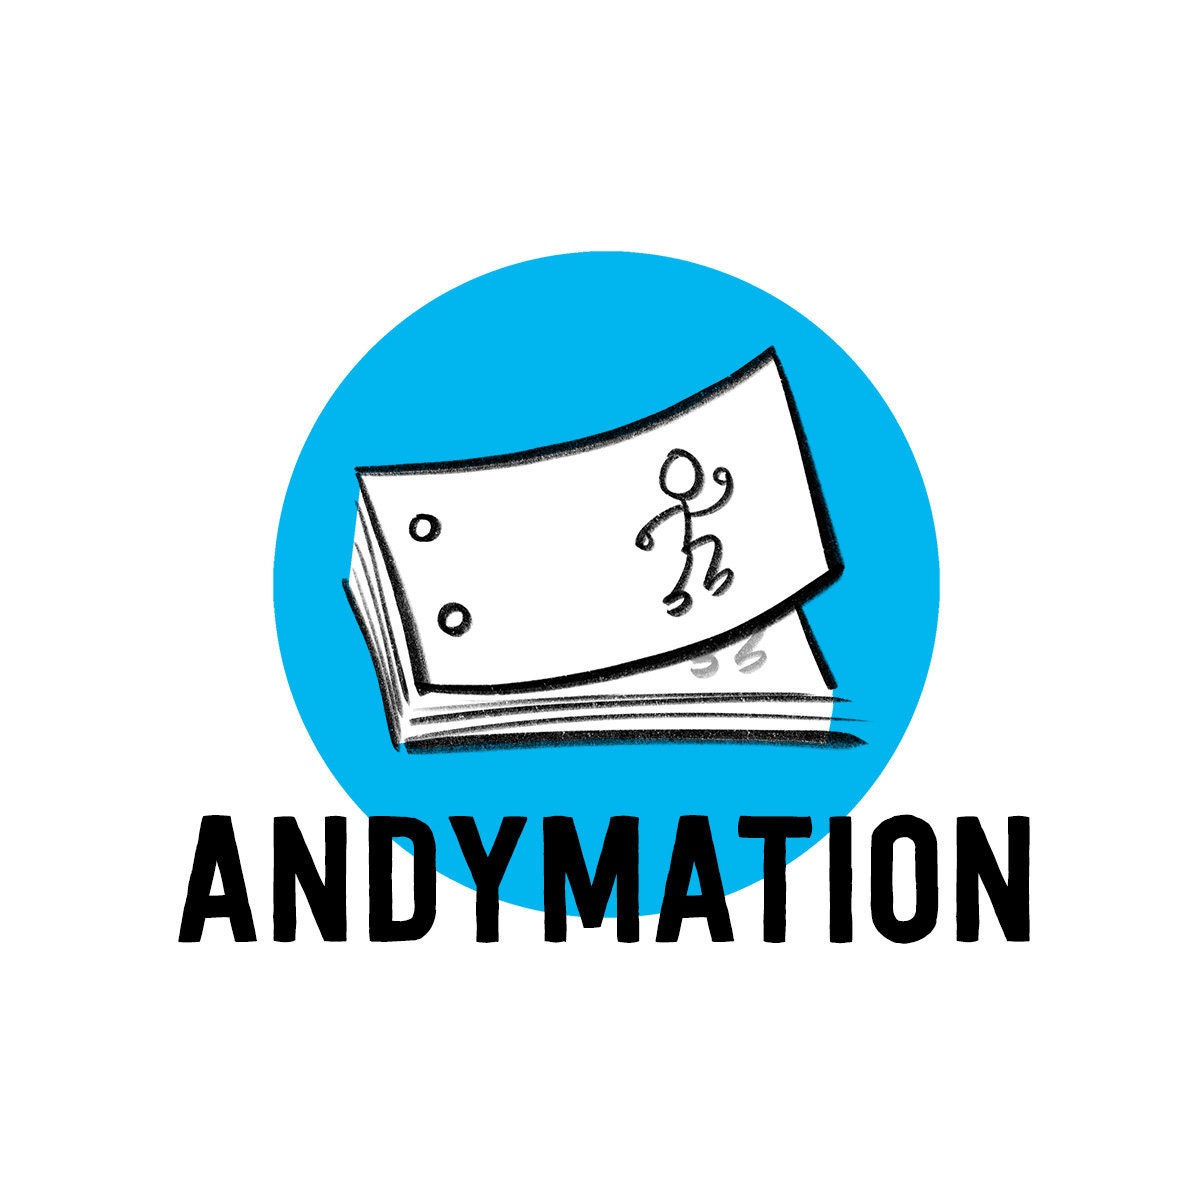 Andymation 8x Paper Pack, Refill Flipbook Paper